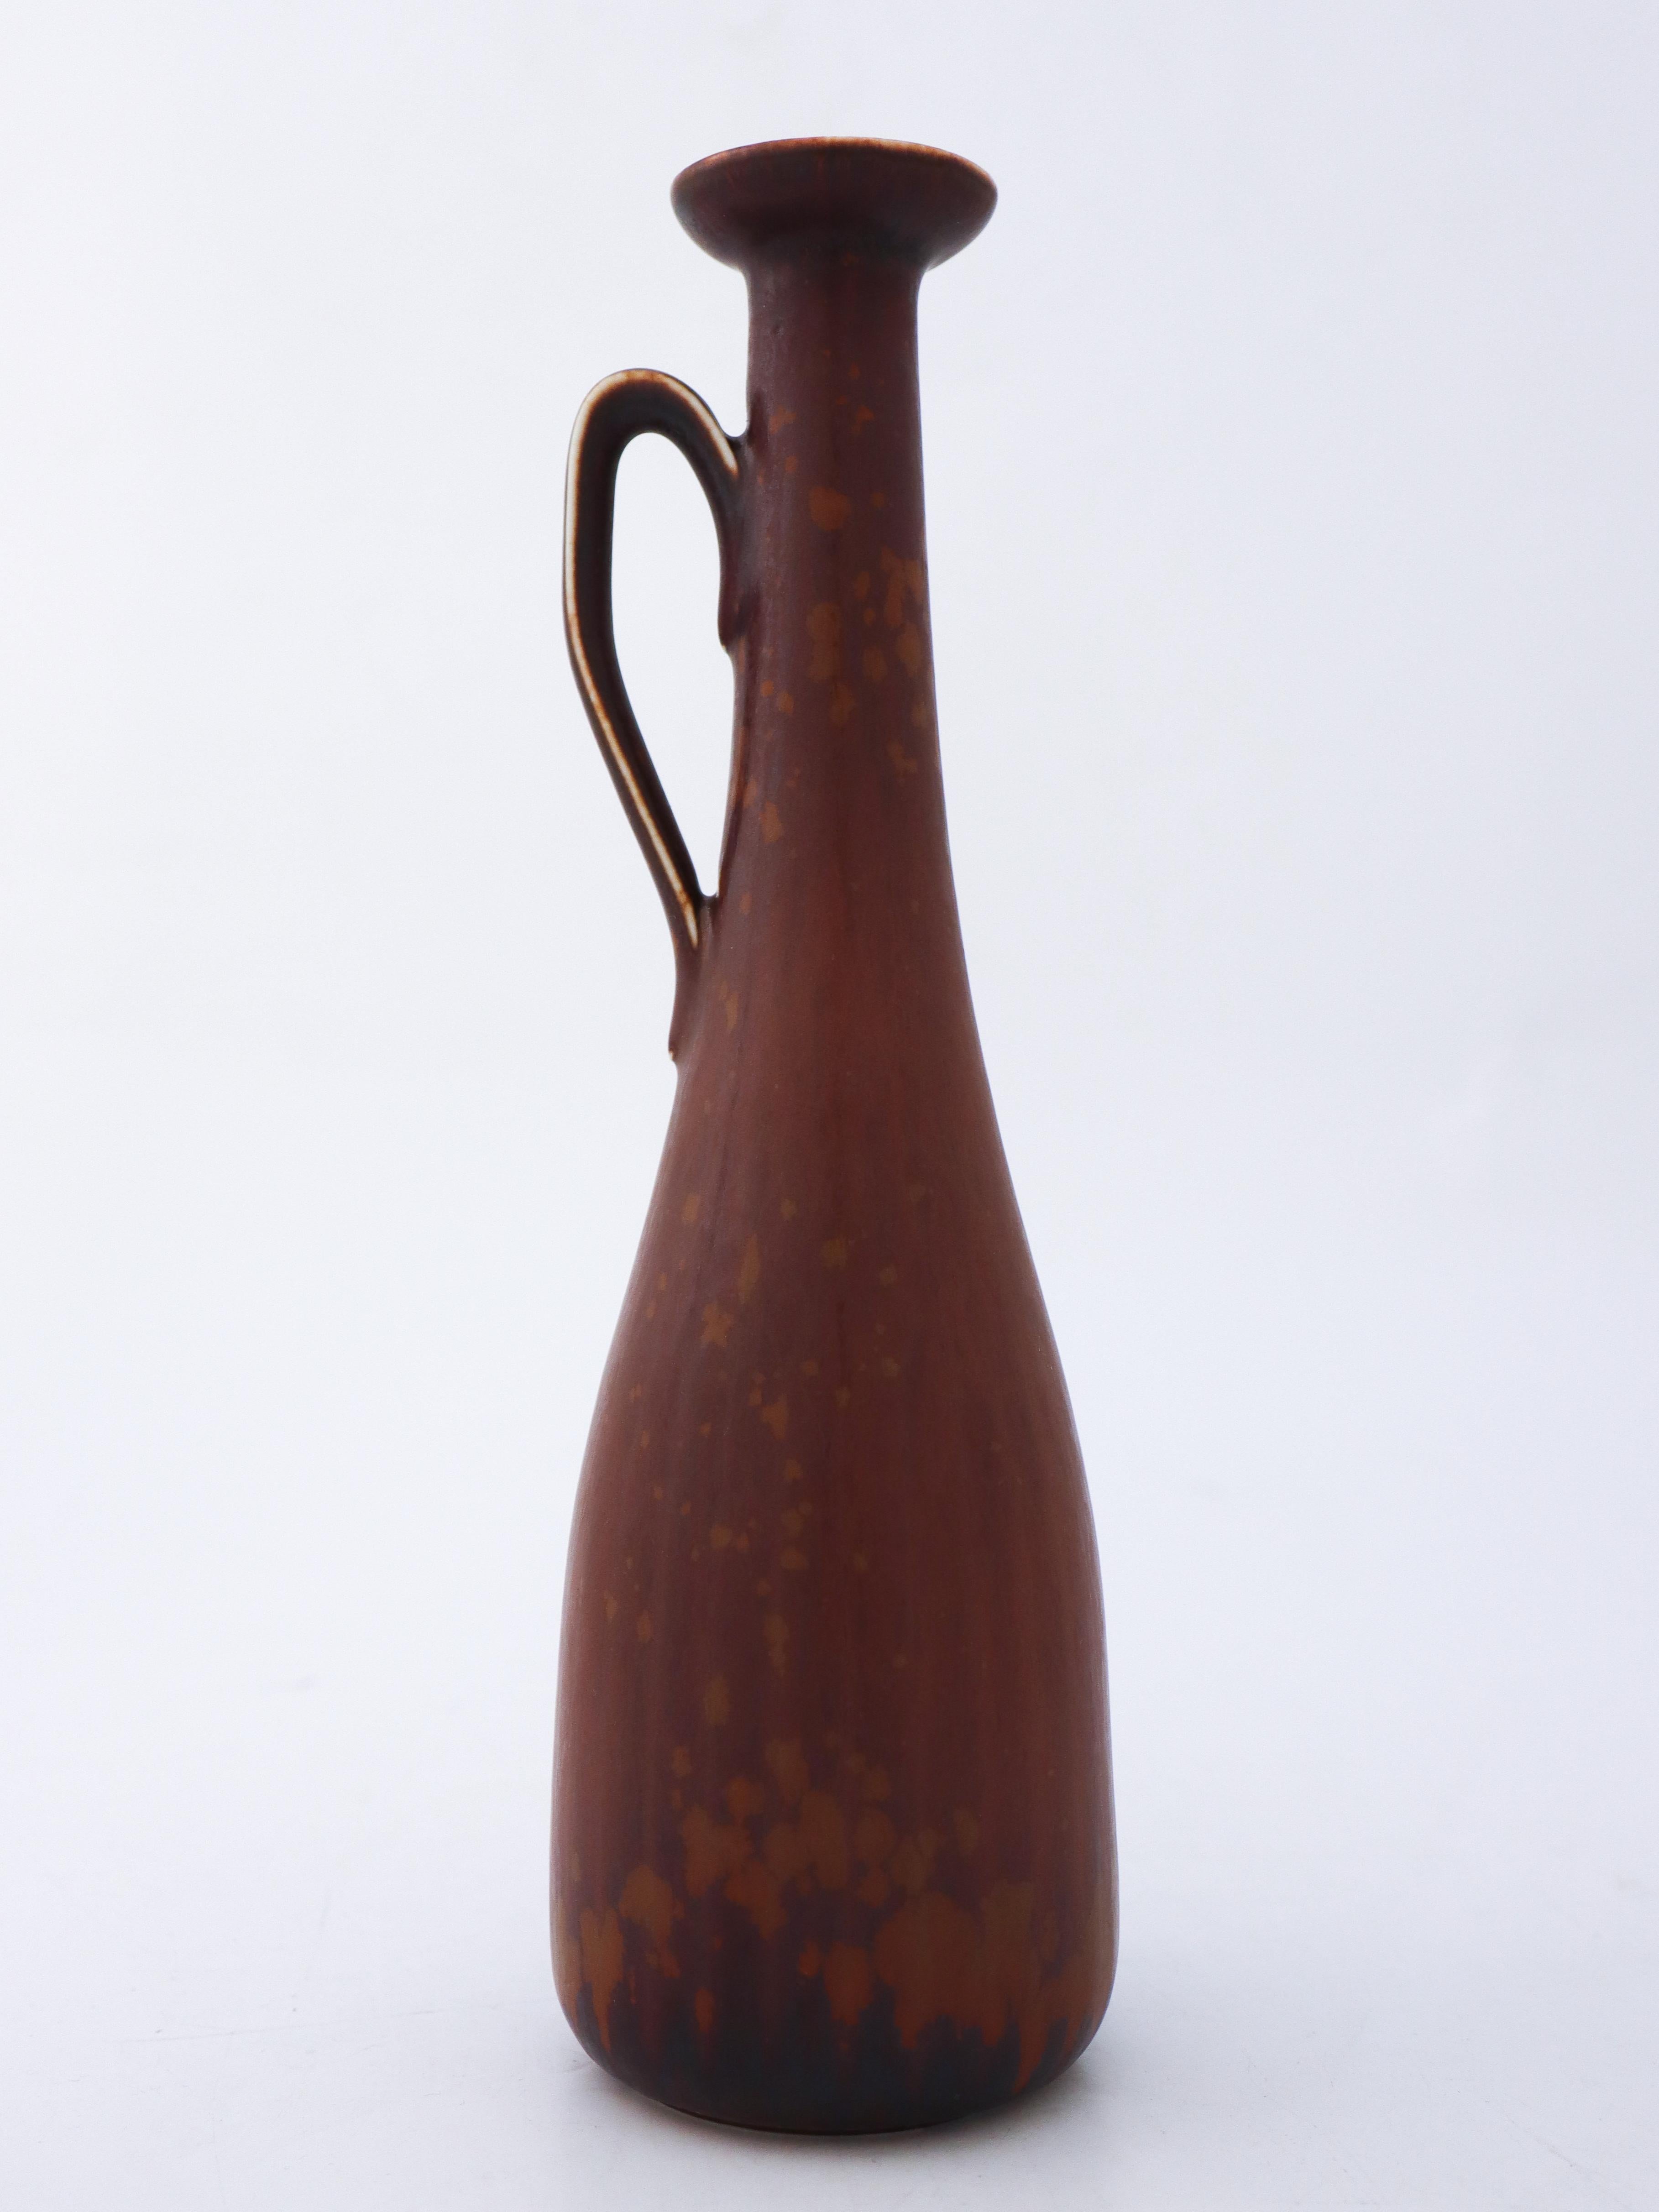 A lovely, brown vase designed by Gunnar Nylund at Rörstrand, it´s 24 cm (9.6) high and 6 cm (2.4